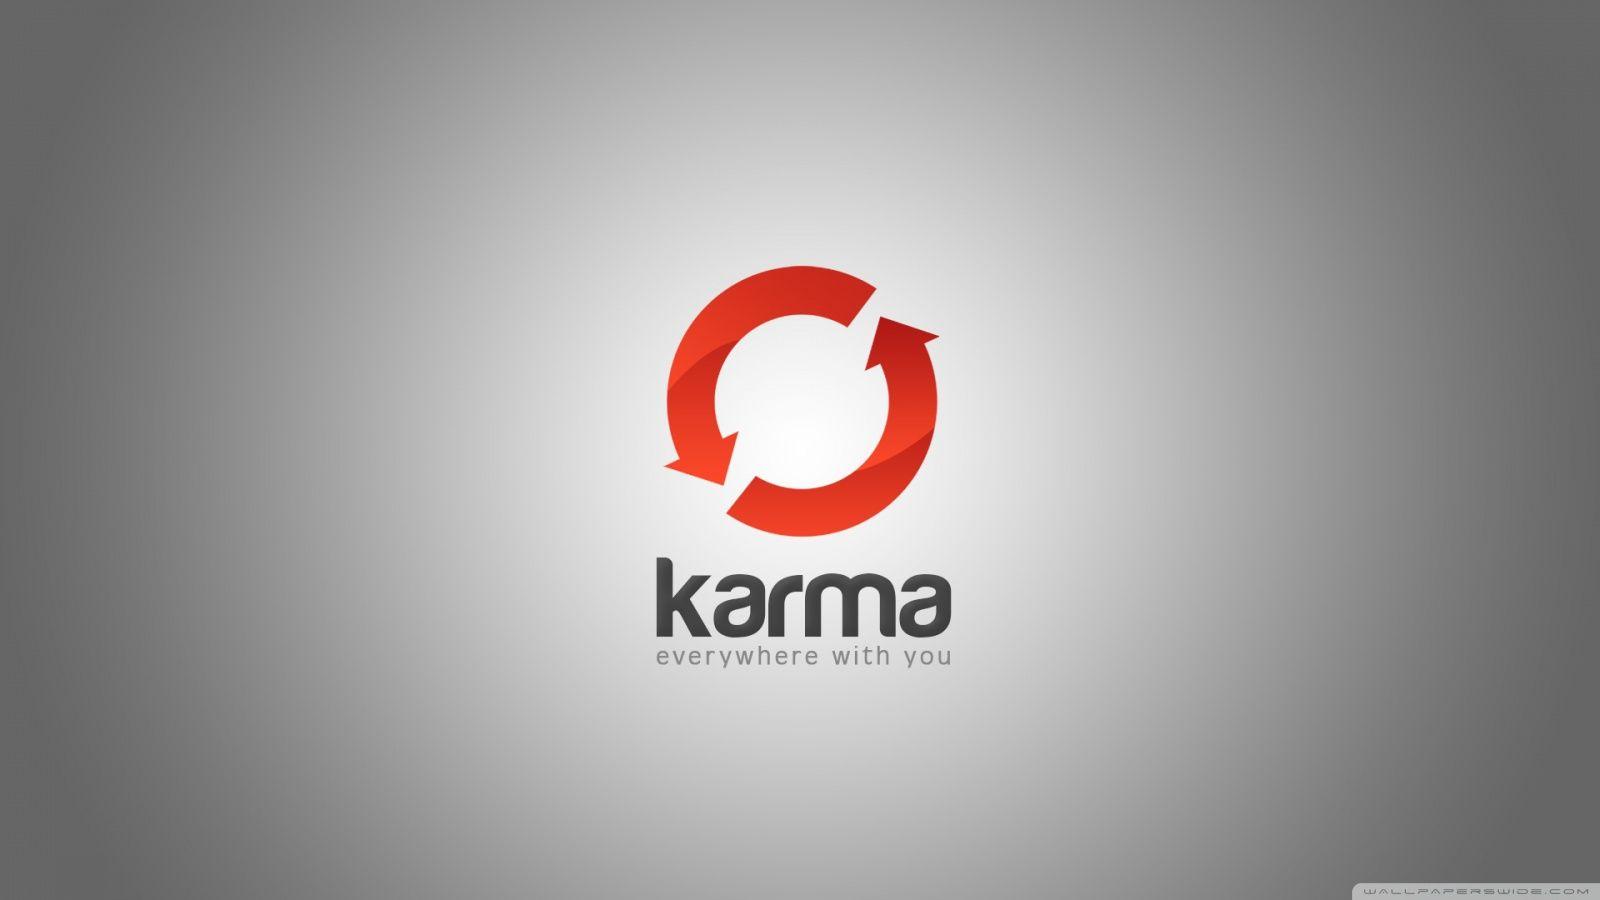 Karma Quotes Wallpapers Top Free Karma Quotes Backgrounds Wallpaperaccess